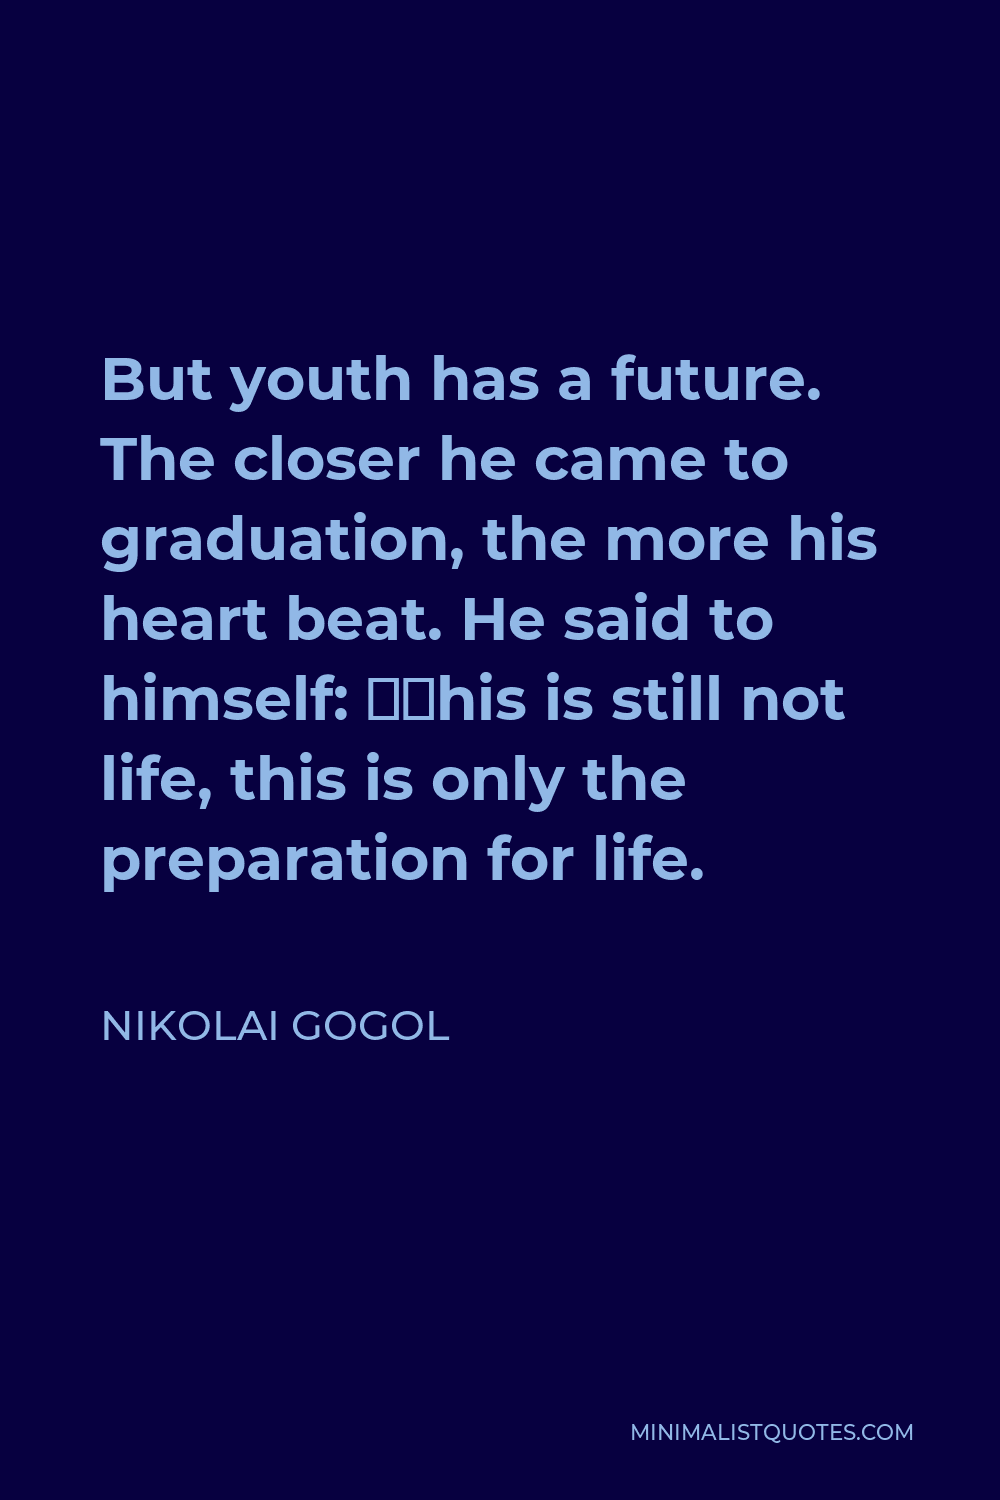 Nikolai Gogol Quote - But youth has a future. The closer he came to graduation, the more his heart beat. He said to himself: “This is still not life, this is only the preparation for life.